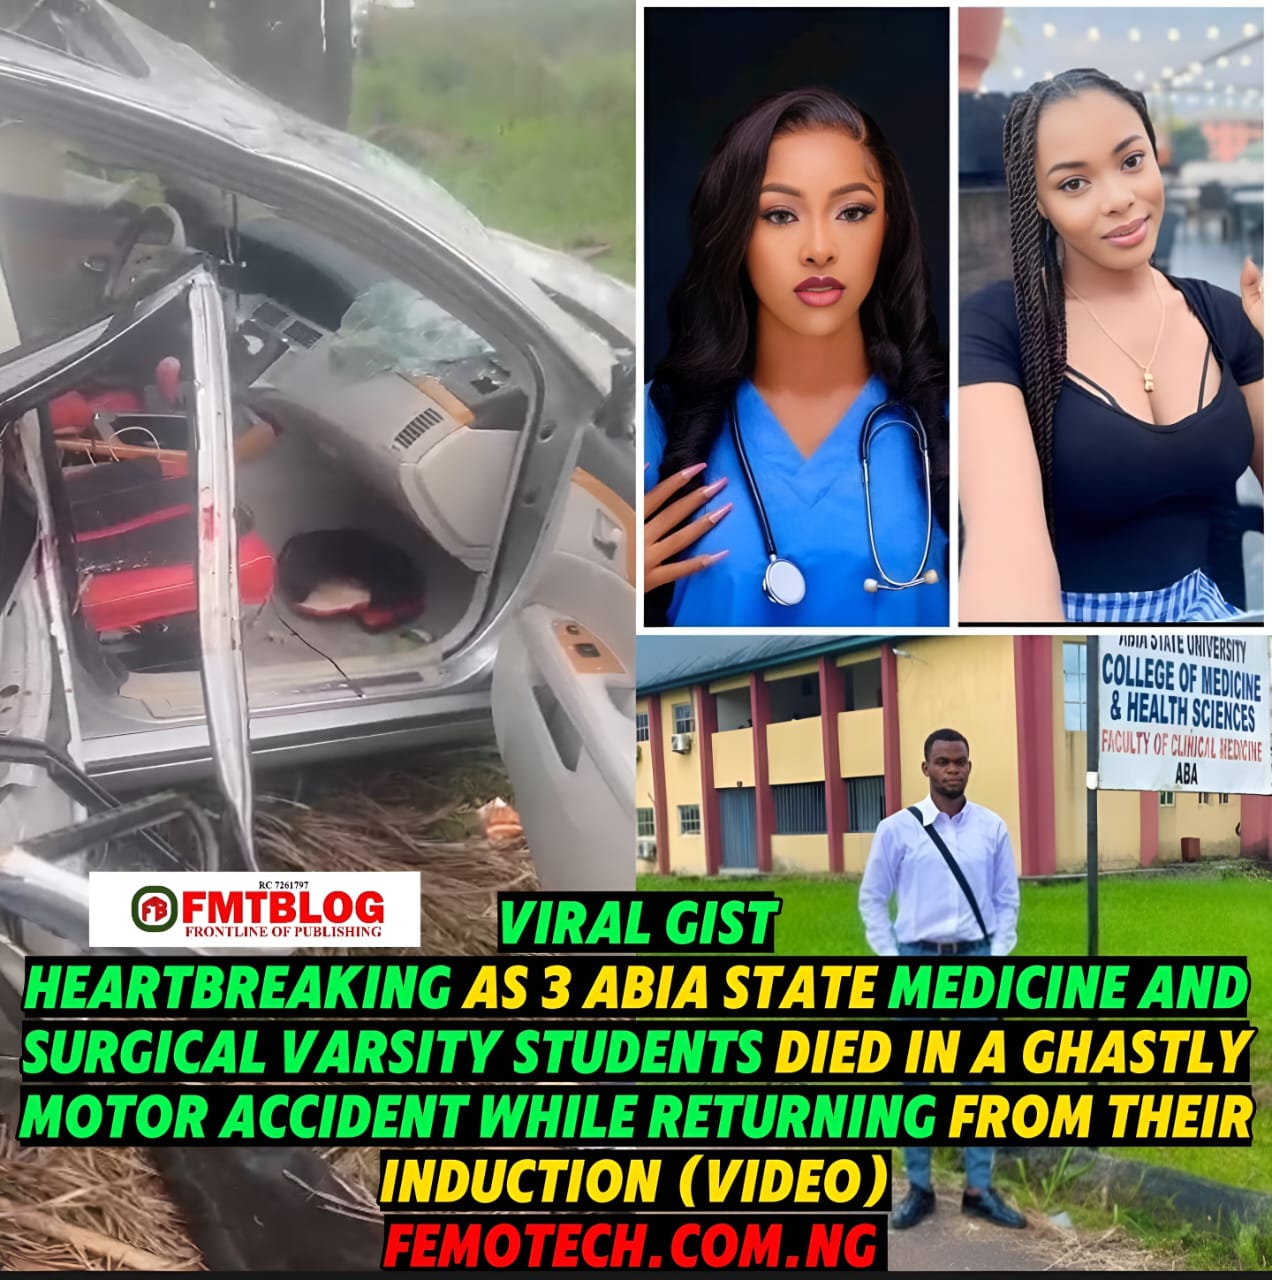 Heartbreaking As 3 Abia State Medicine And Surgical Varsity Students Died In A Ghastly Motor Accident While Returning From Their Induction (VIDEO)